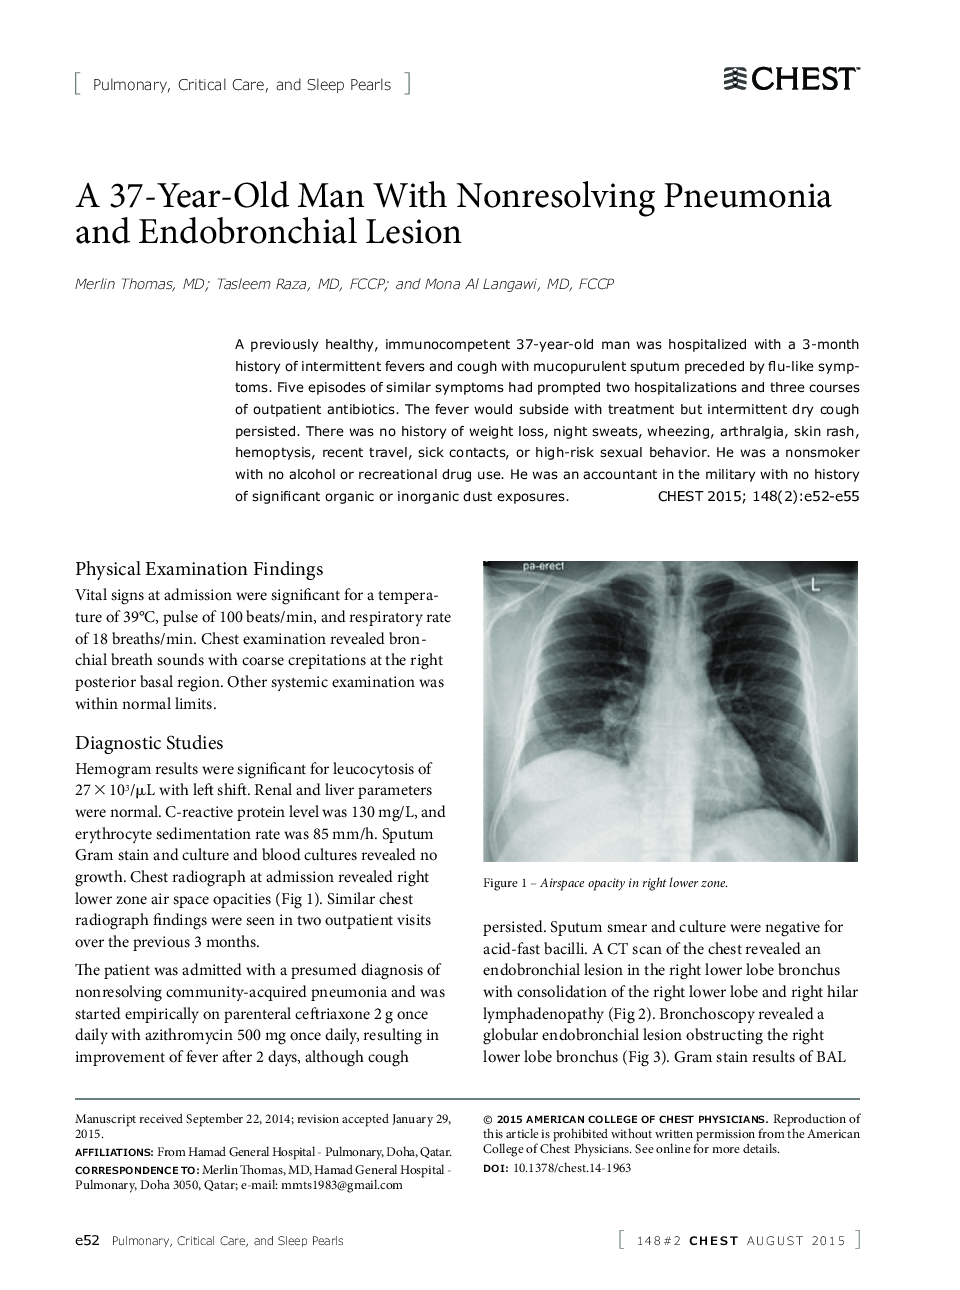 A 37-Year-Old Man With Nonresolving Pneumonia and Endobronchial Lesion